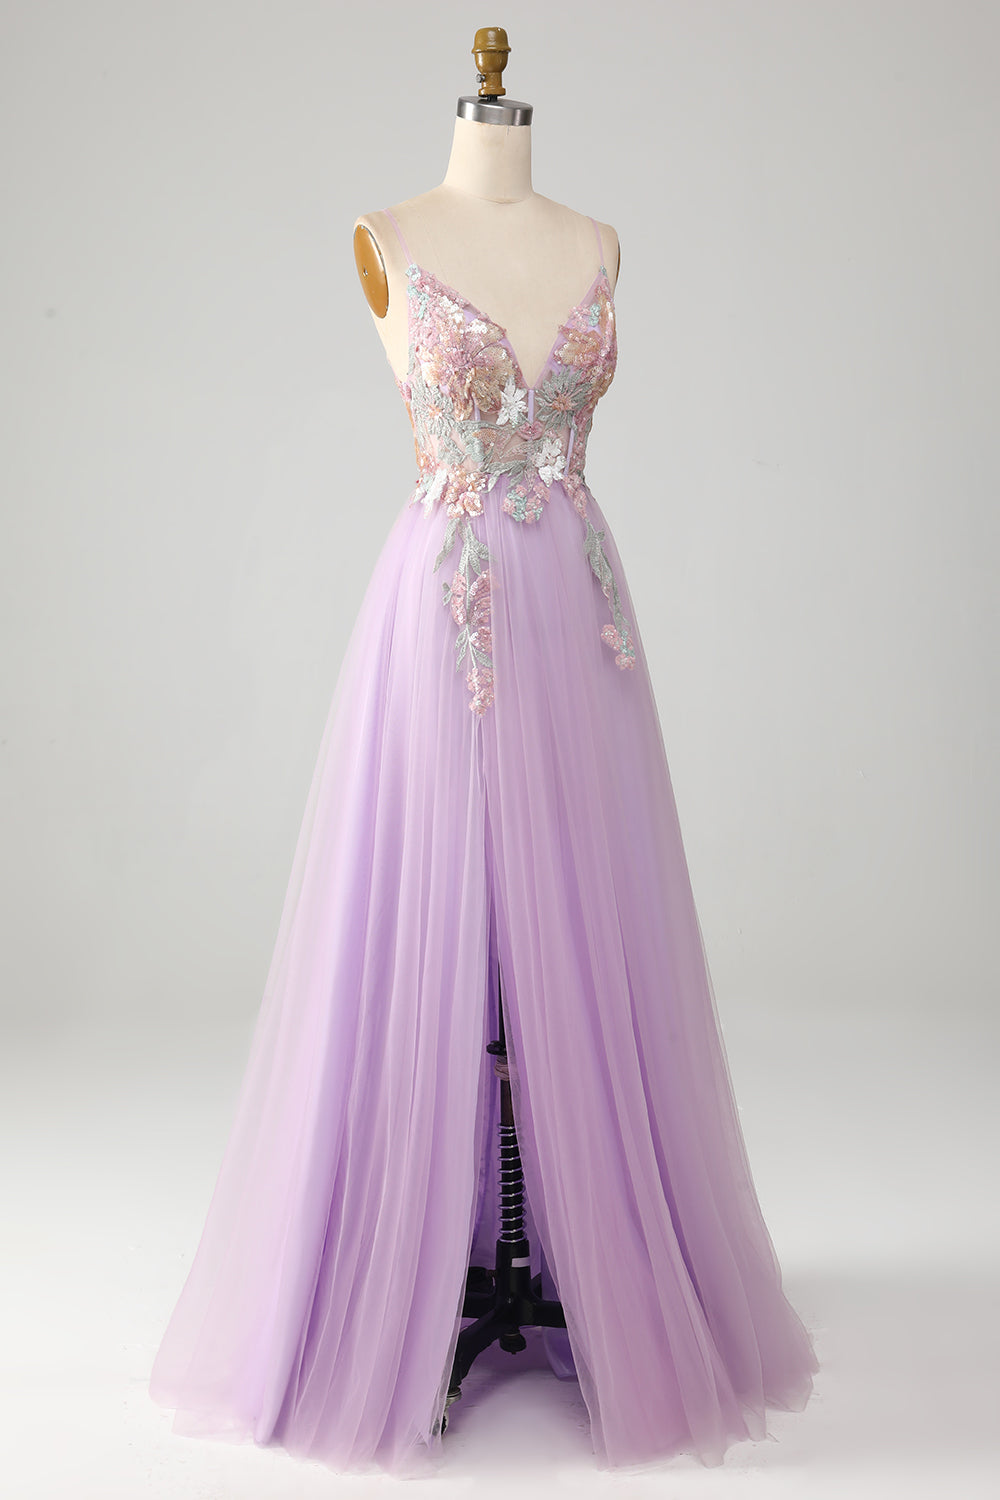 Glitter Lilac A-Line Spaghetti Straps Long Prom Dress with Flowers